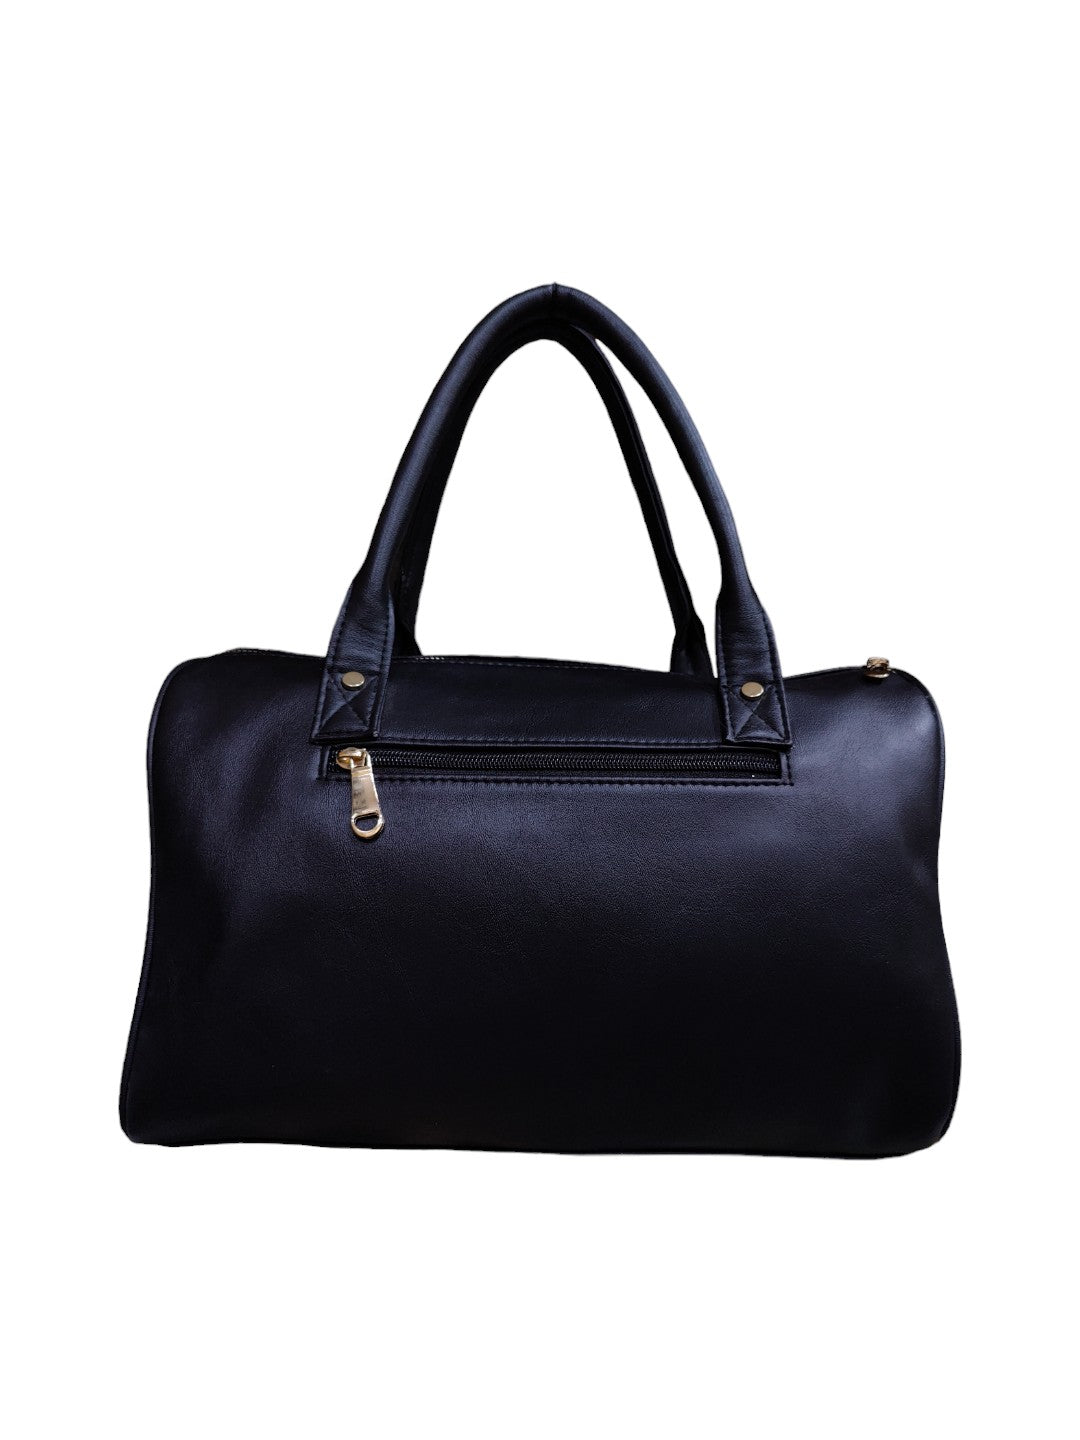 With its structured silhouette and durable construction, this timeless accessory is both practical and sophisticated. 